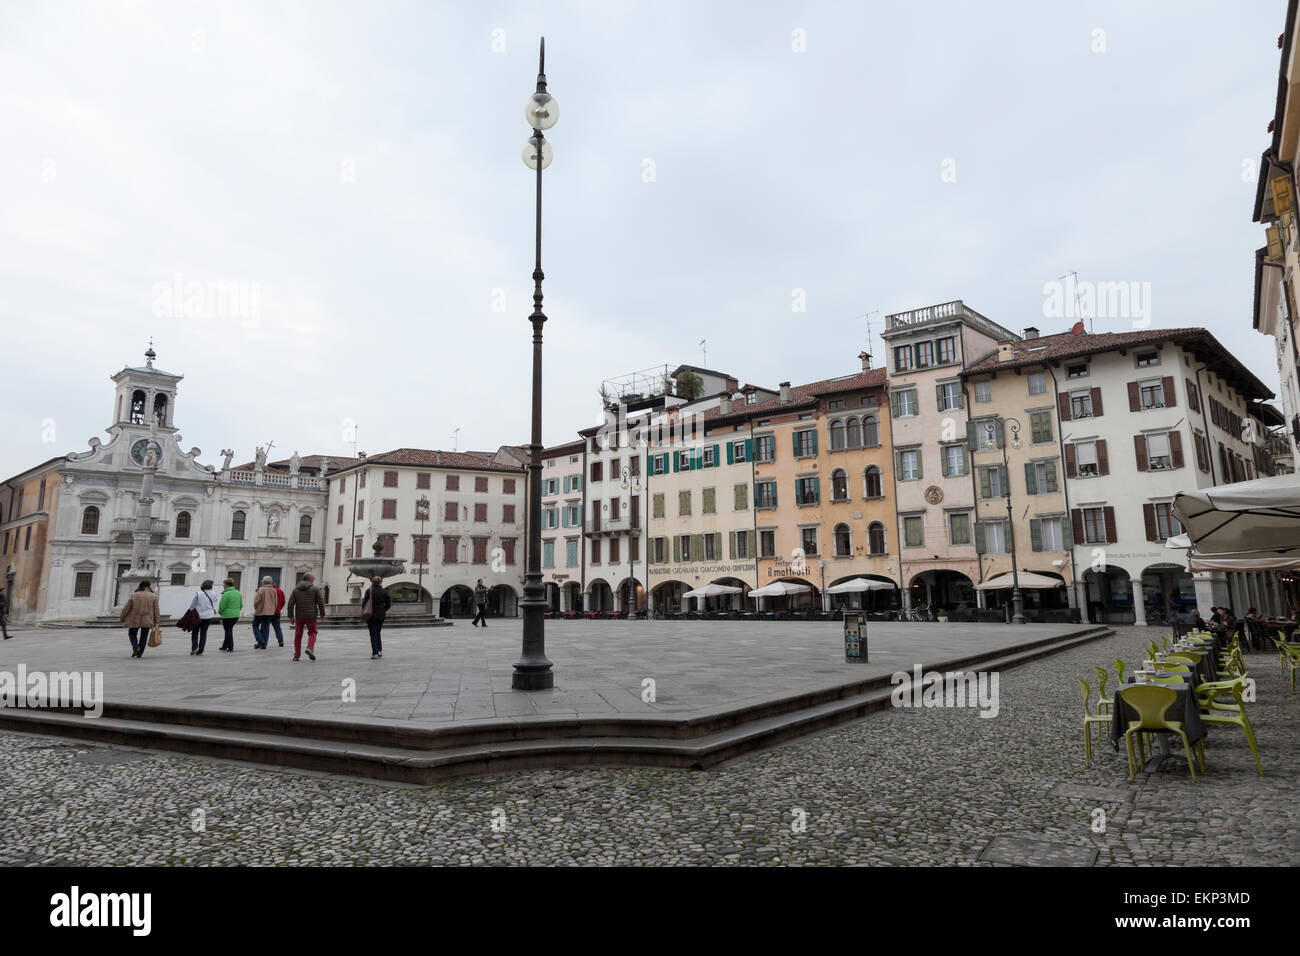 Overview of Piazza Matteotti, Udine Stock Photo